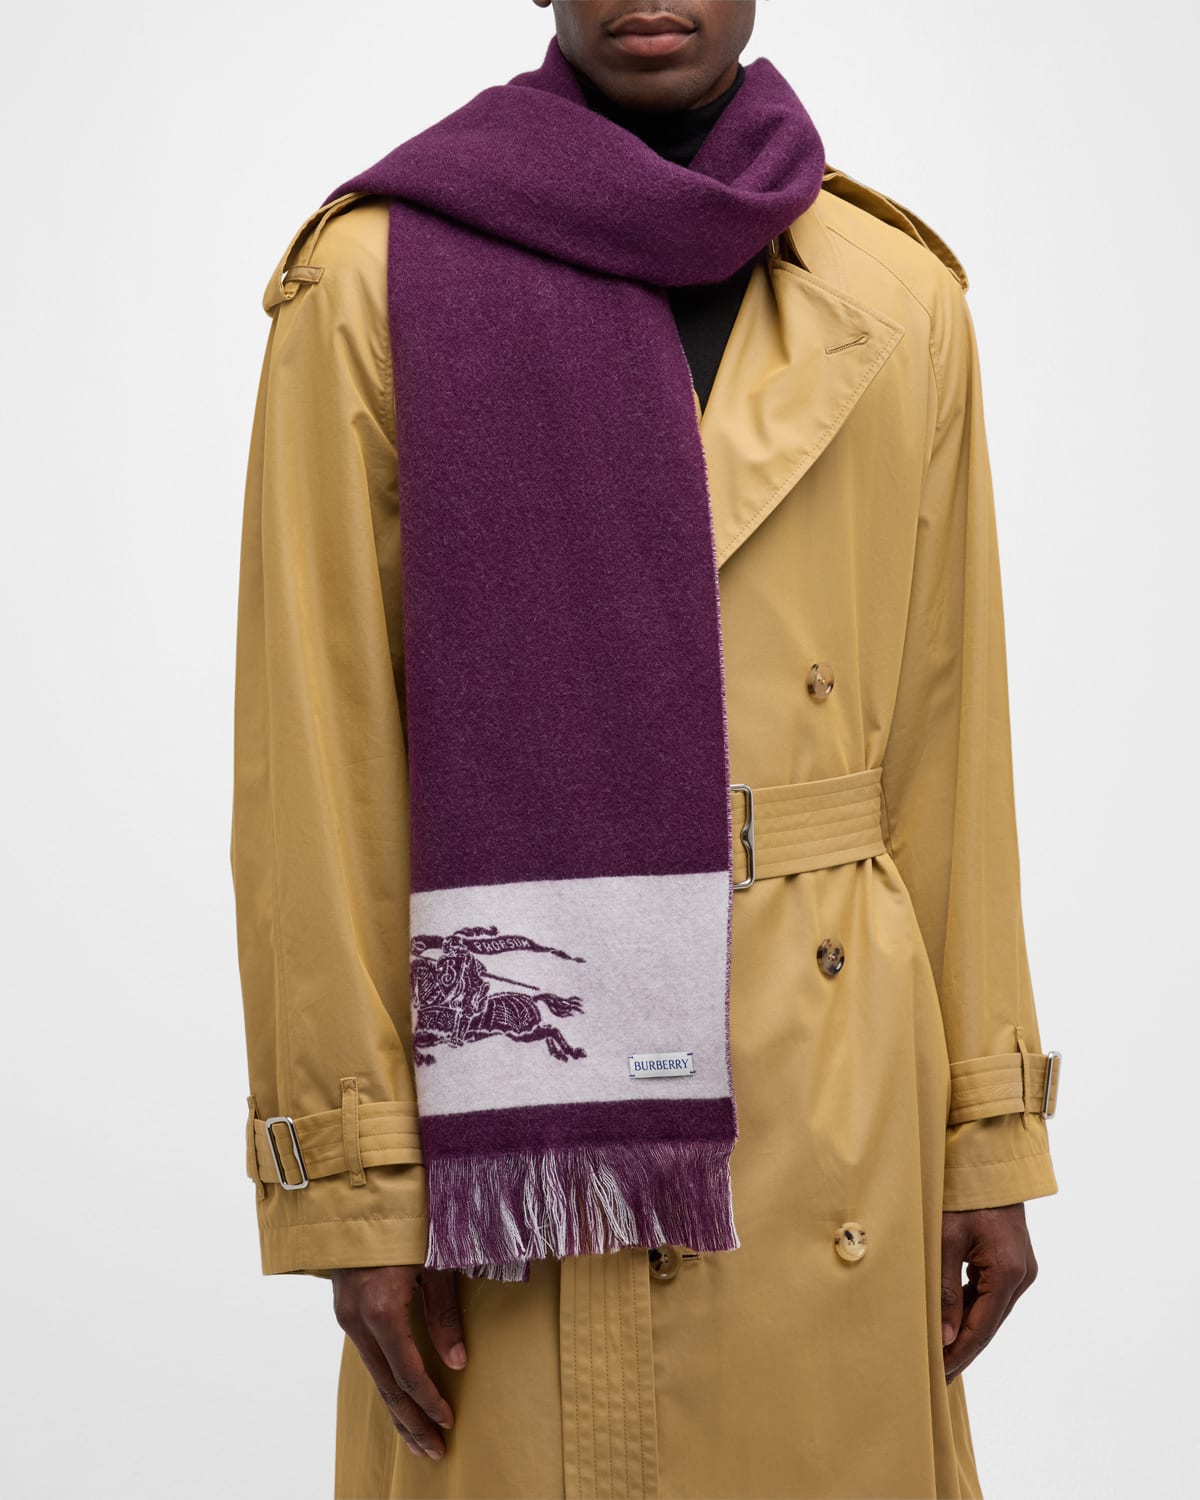 Burberry Men's Cashmere Football Scarf In Purple